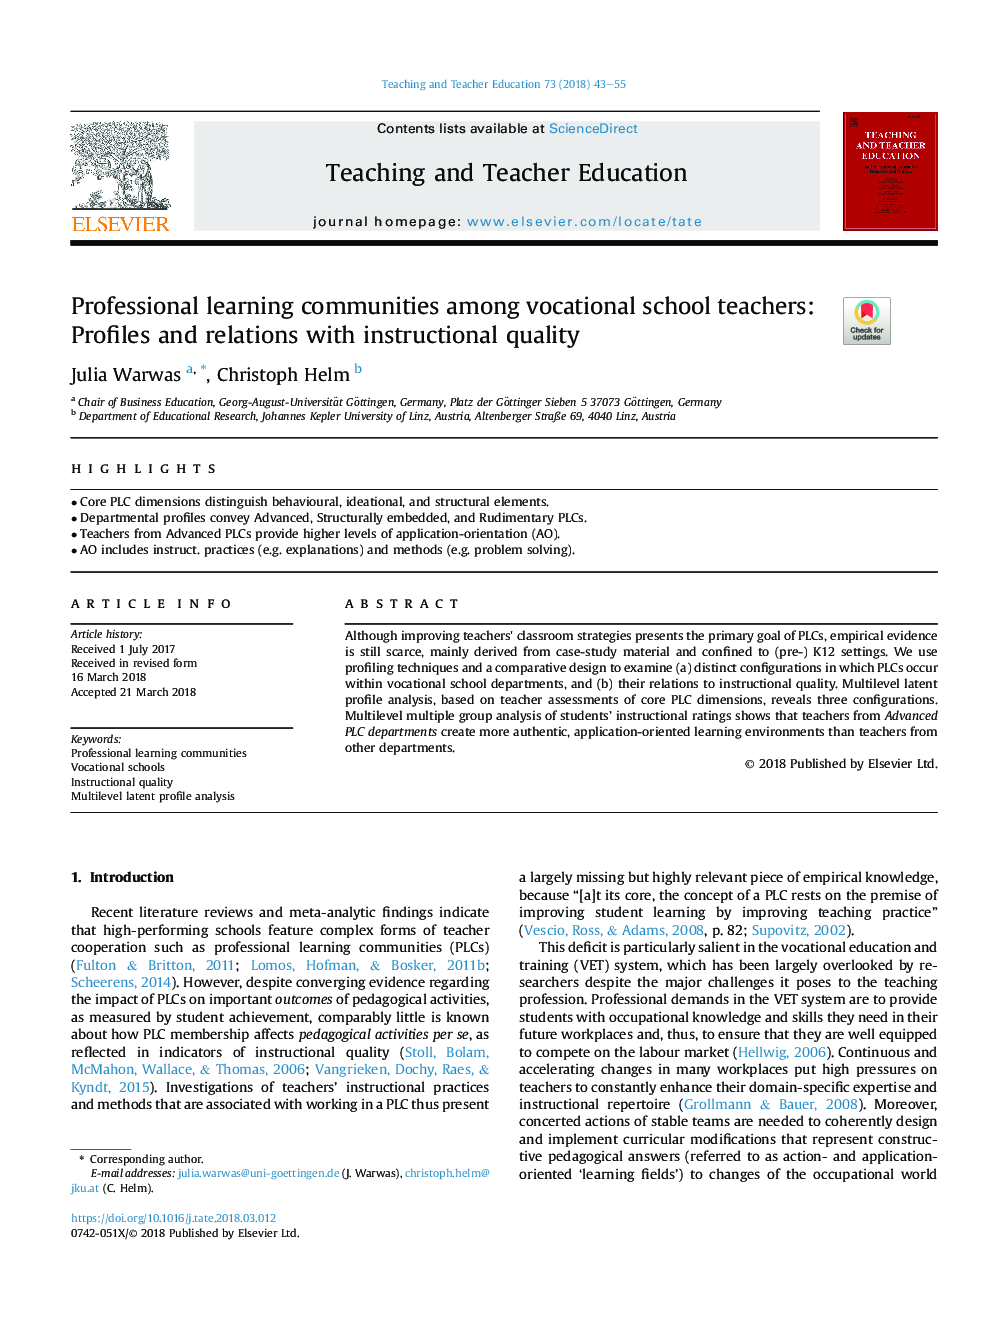 Professional learning communities among vocational school teachers: Profiles and relations with instructional quality